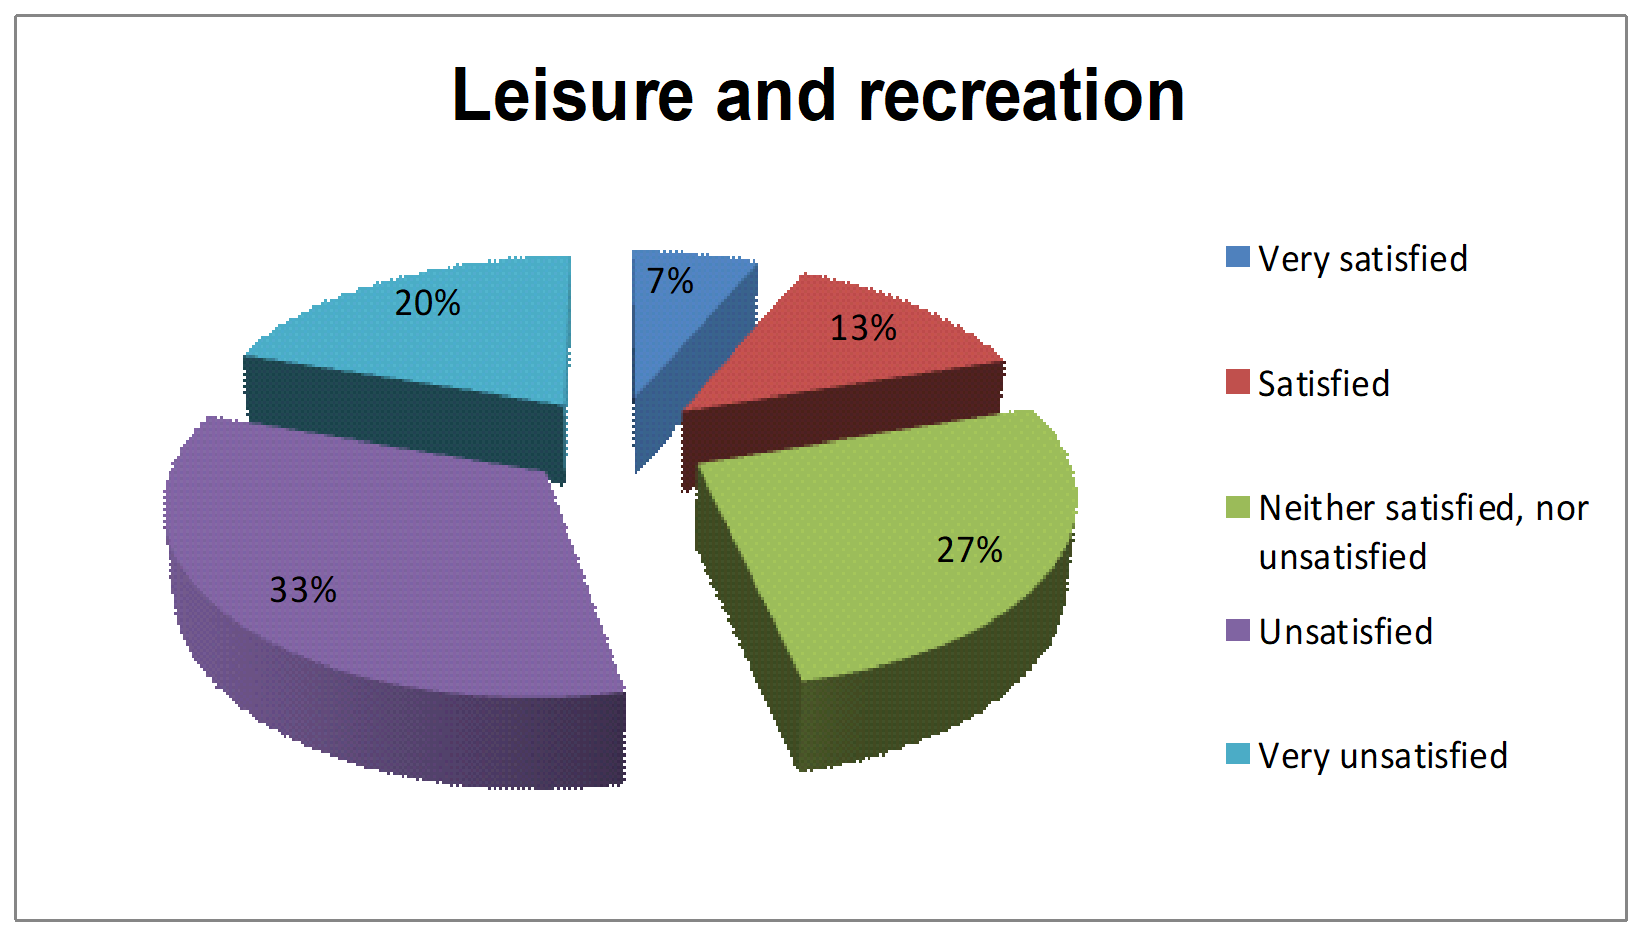 Leisure and recreation